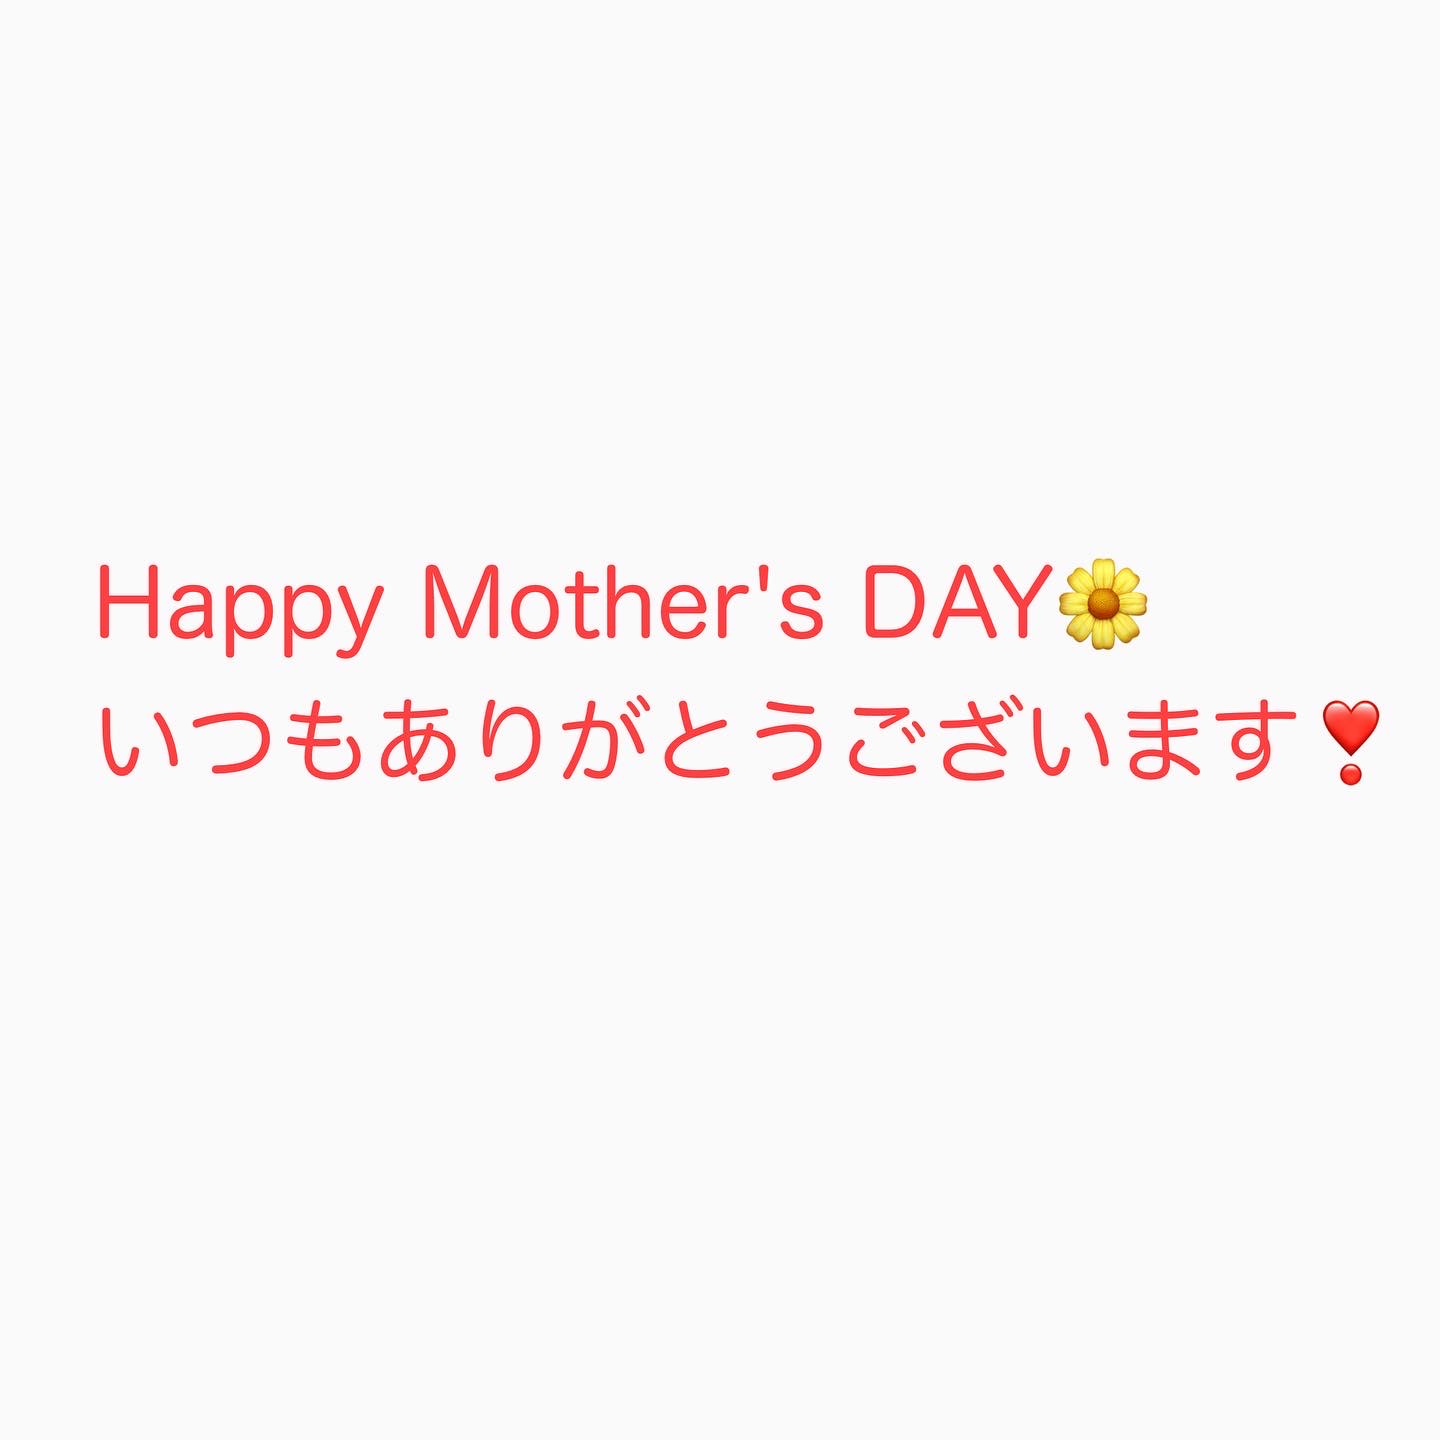 Happy Mother’s Daypage-visual Happy Mother’s Dayビジュアル